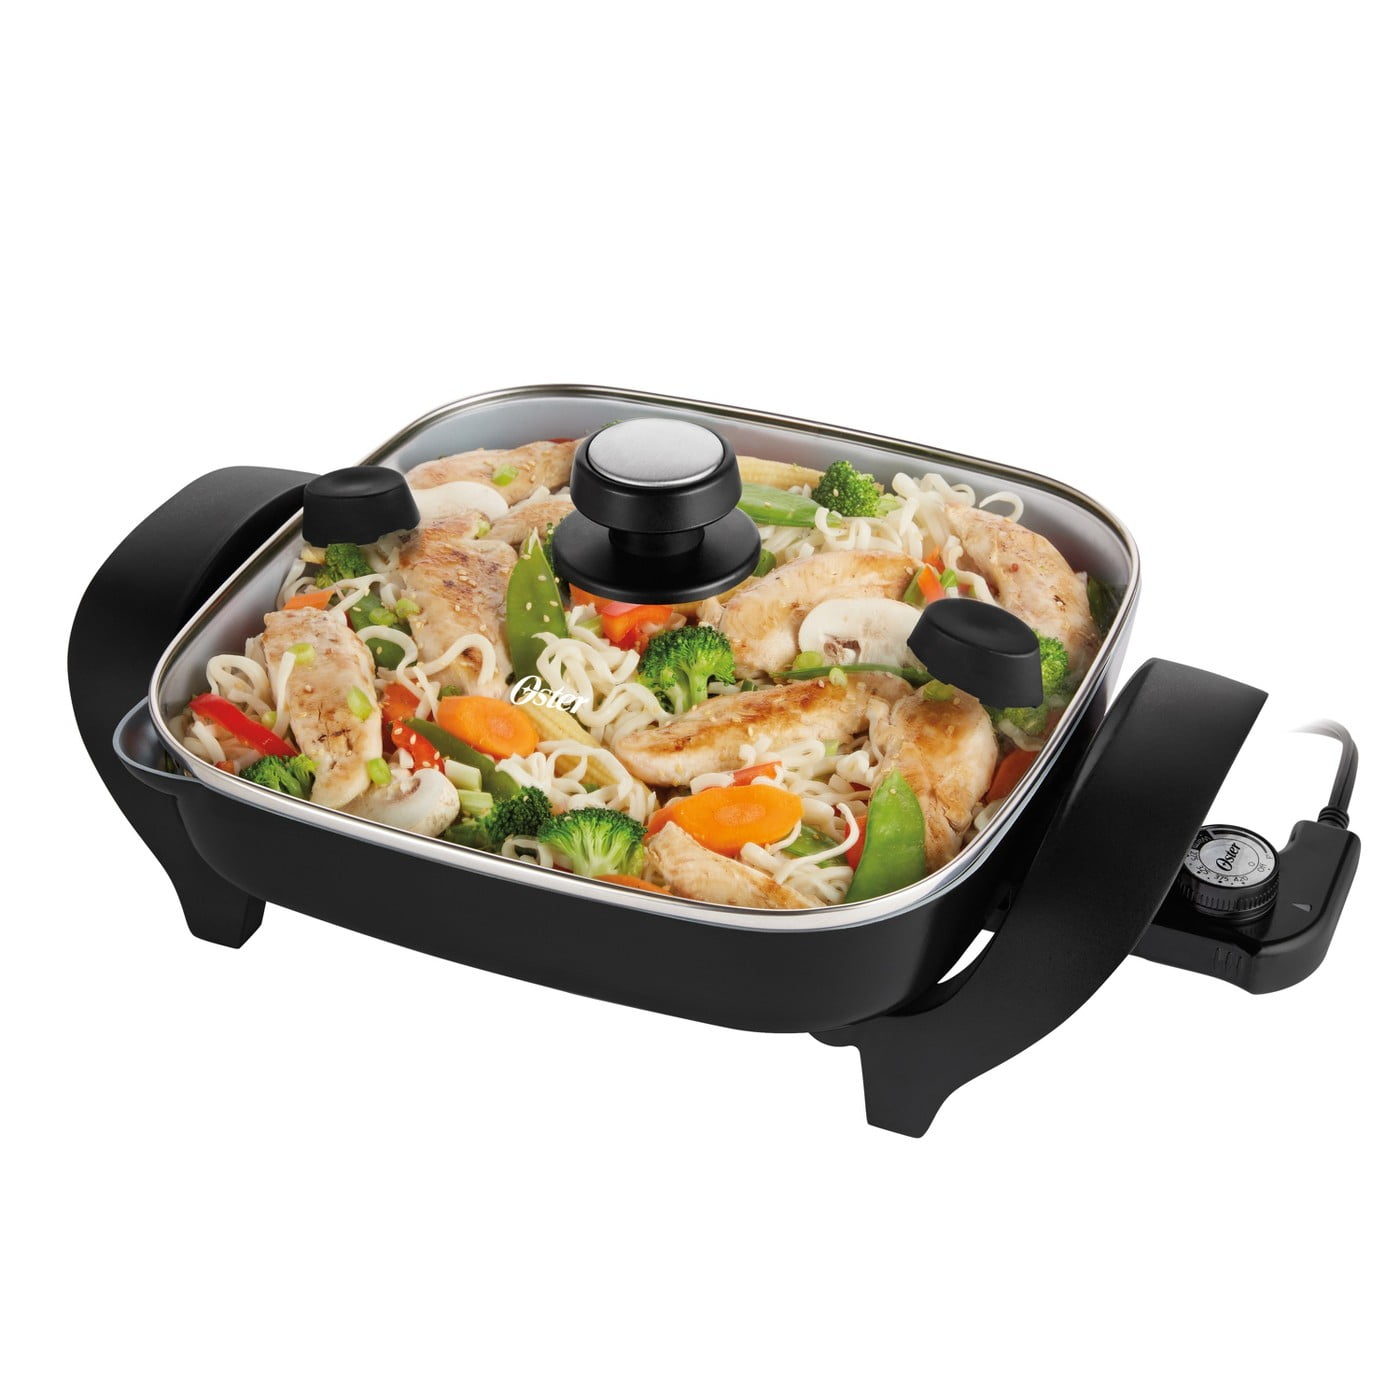 Oster DuraCeramic 12 Electric Skillet With Pour & Strain Lid